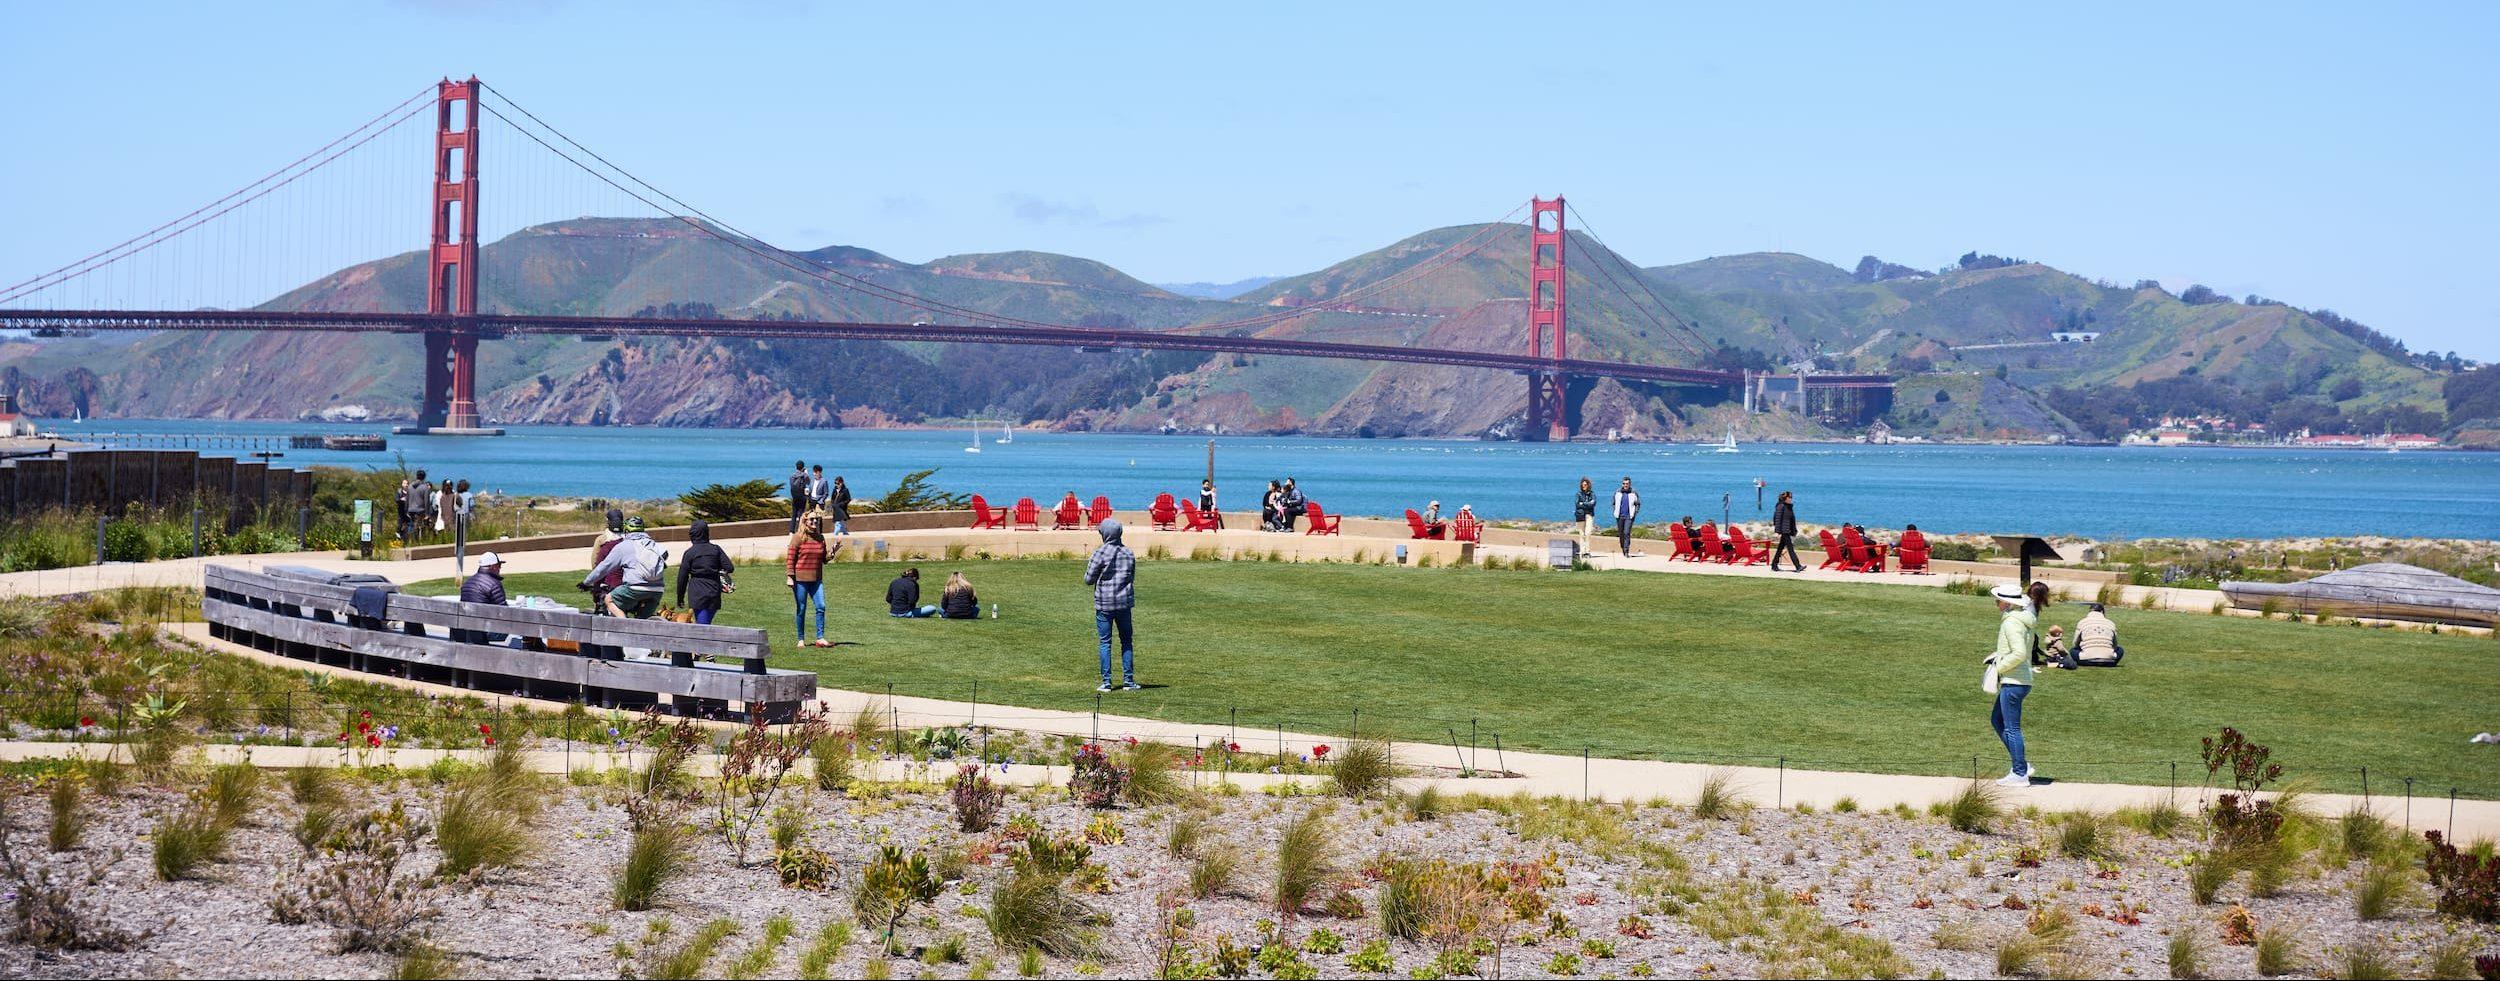 A broad view of Presidio Tunnel Tops with the Golden Gate Bridge. Photo by Rachel Styer.